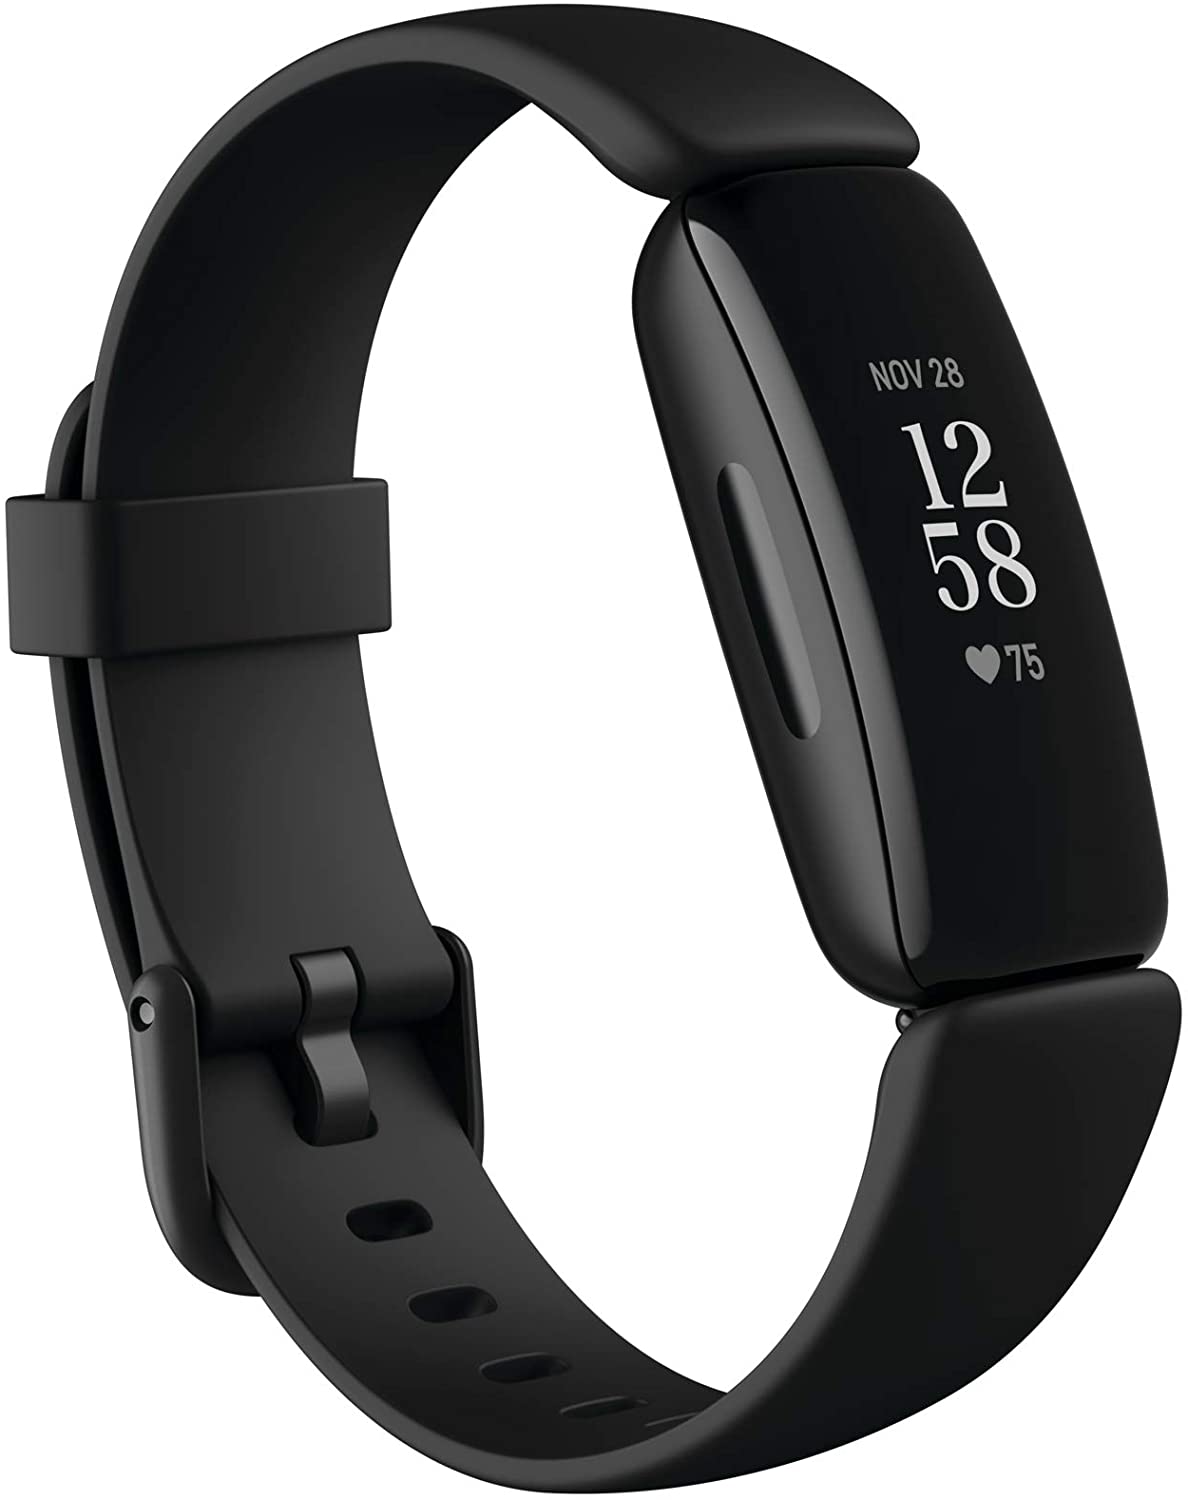 Fitbit Inspire 2 Health &amp; Fitness Tracker with 24/7 Heart Rate - Black (New)